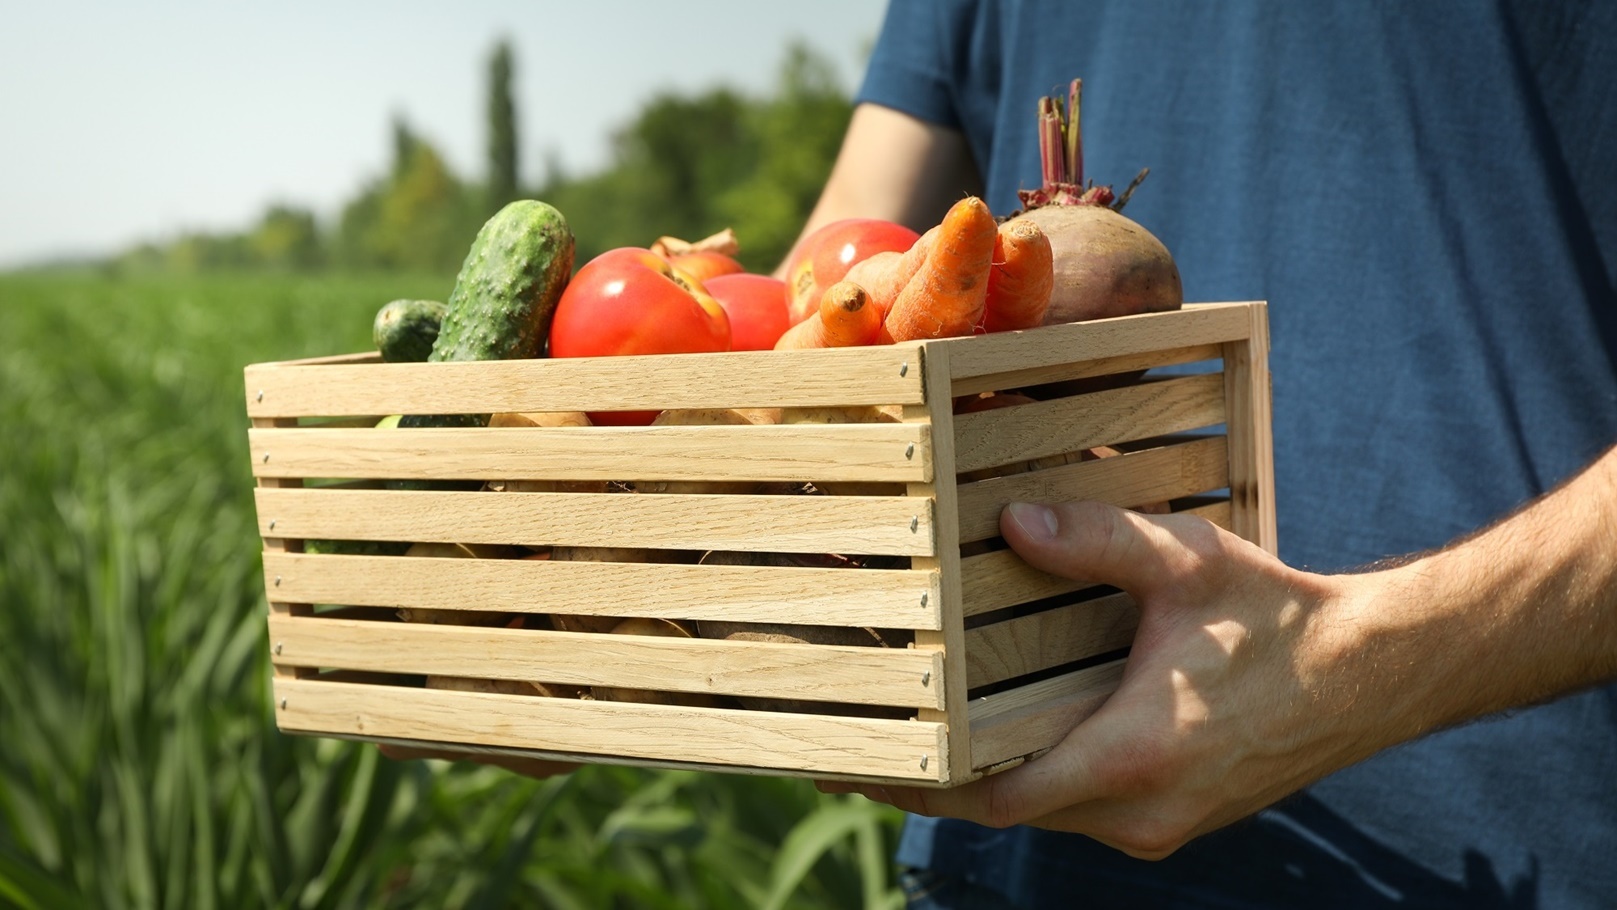 man-with-wooden-box-of-vegetables-in-corn-field-f-2021-09-02-21-43-08-utc